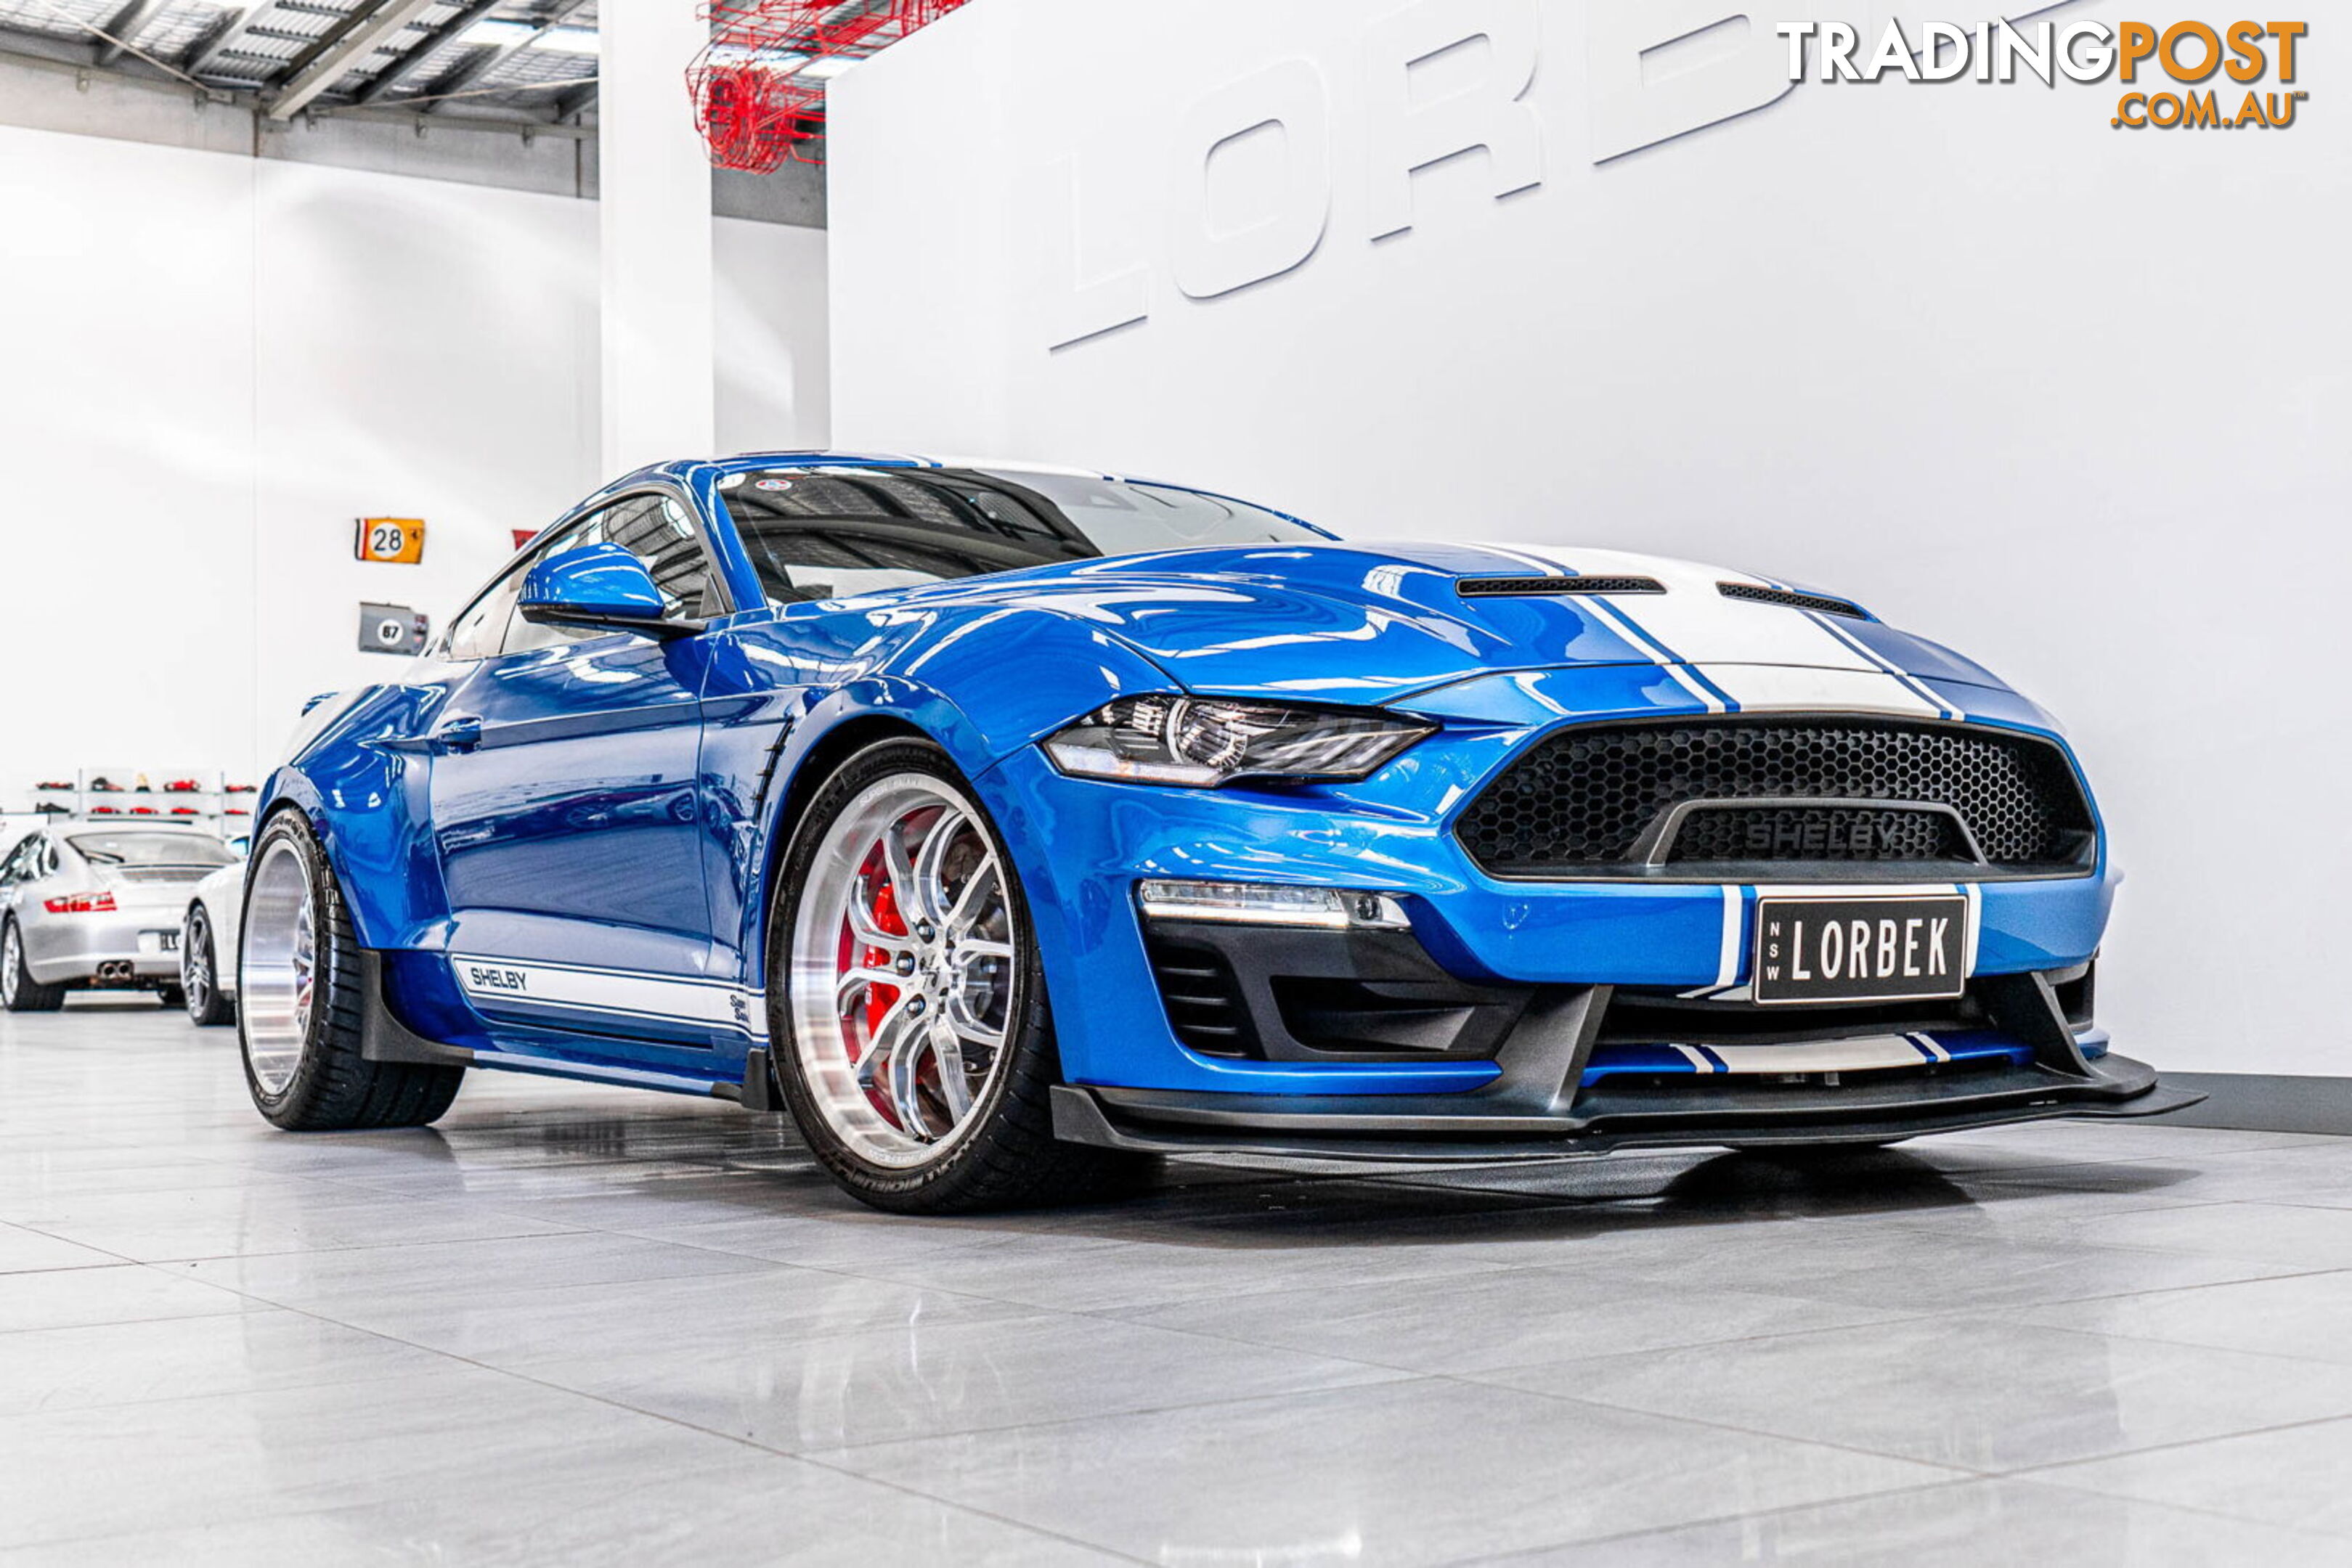 2019 Ford Mustang Shelby Supersnake WIDEBODY FN